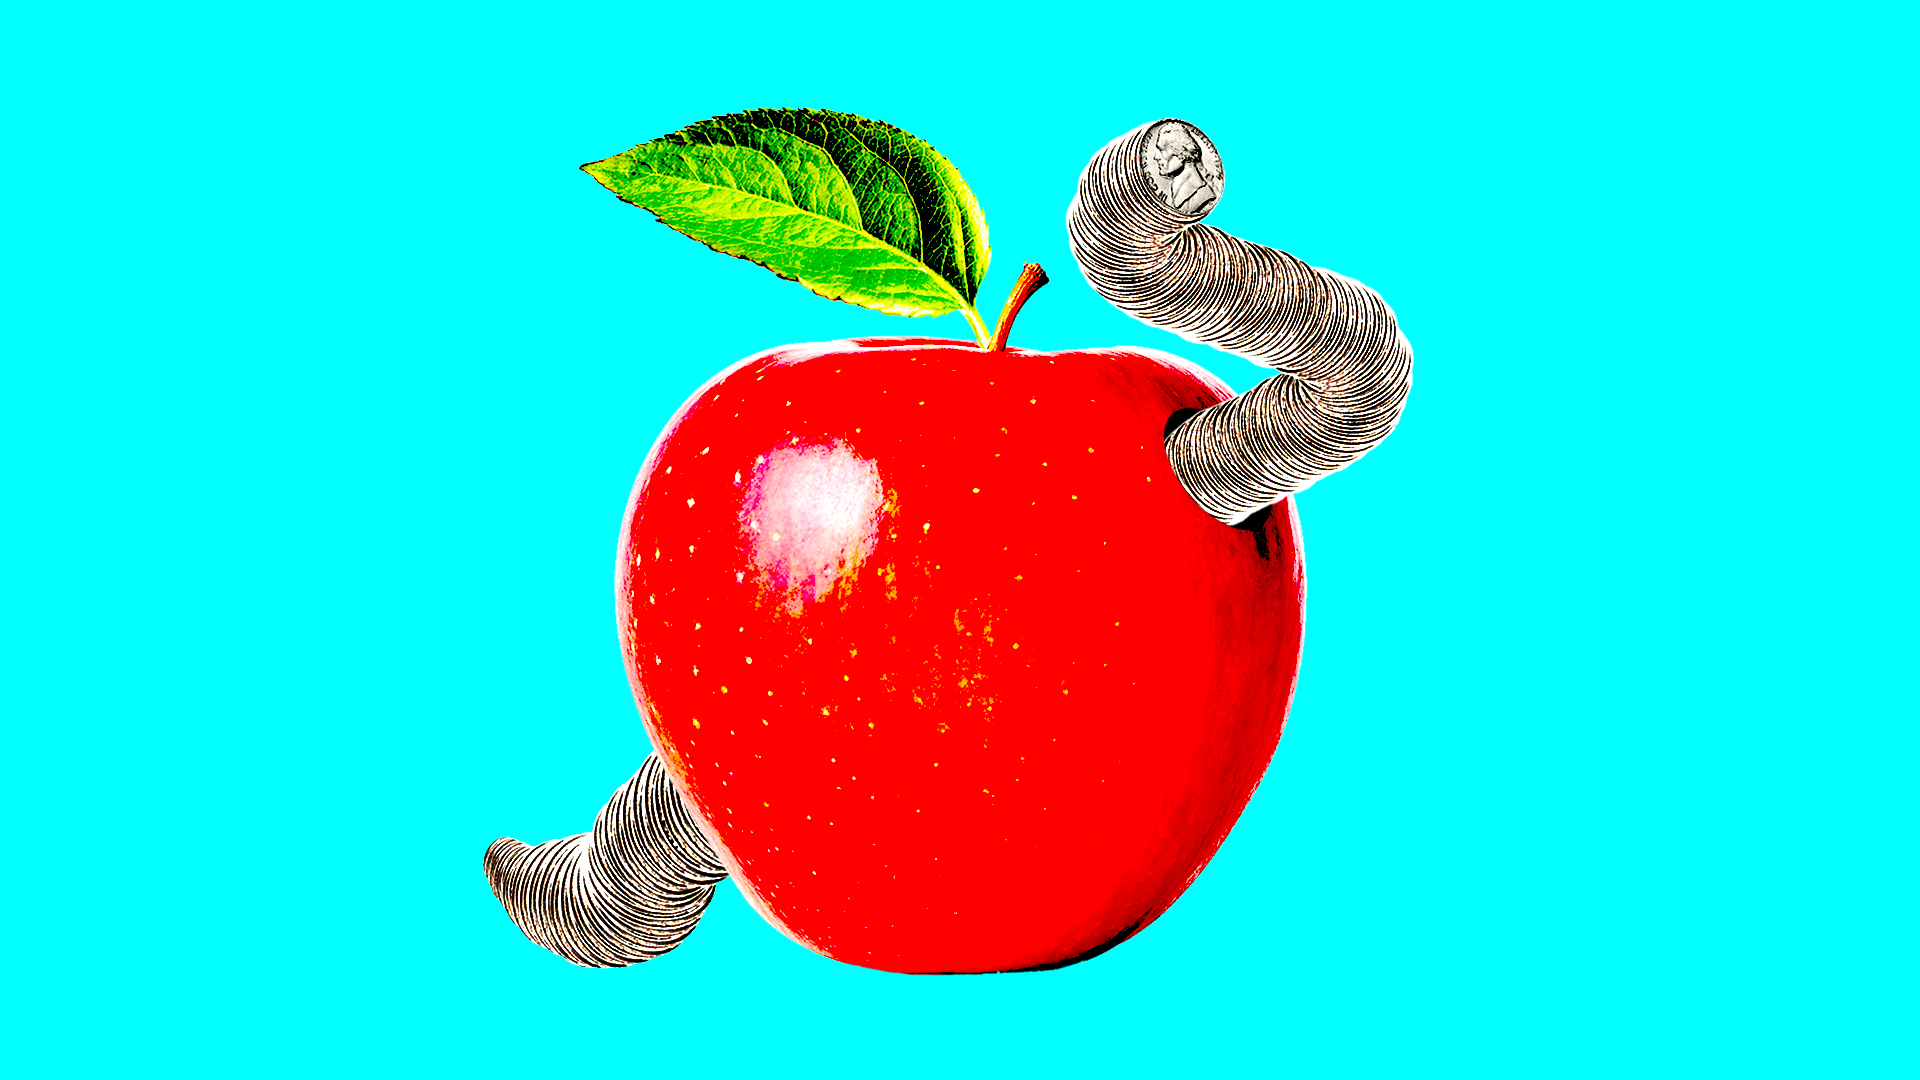 A worm made of coins works its way through a red apple. 